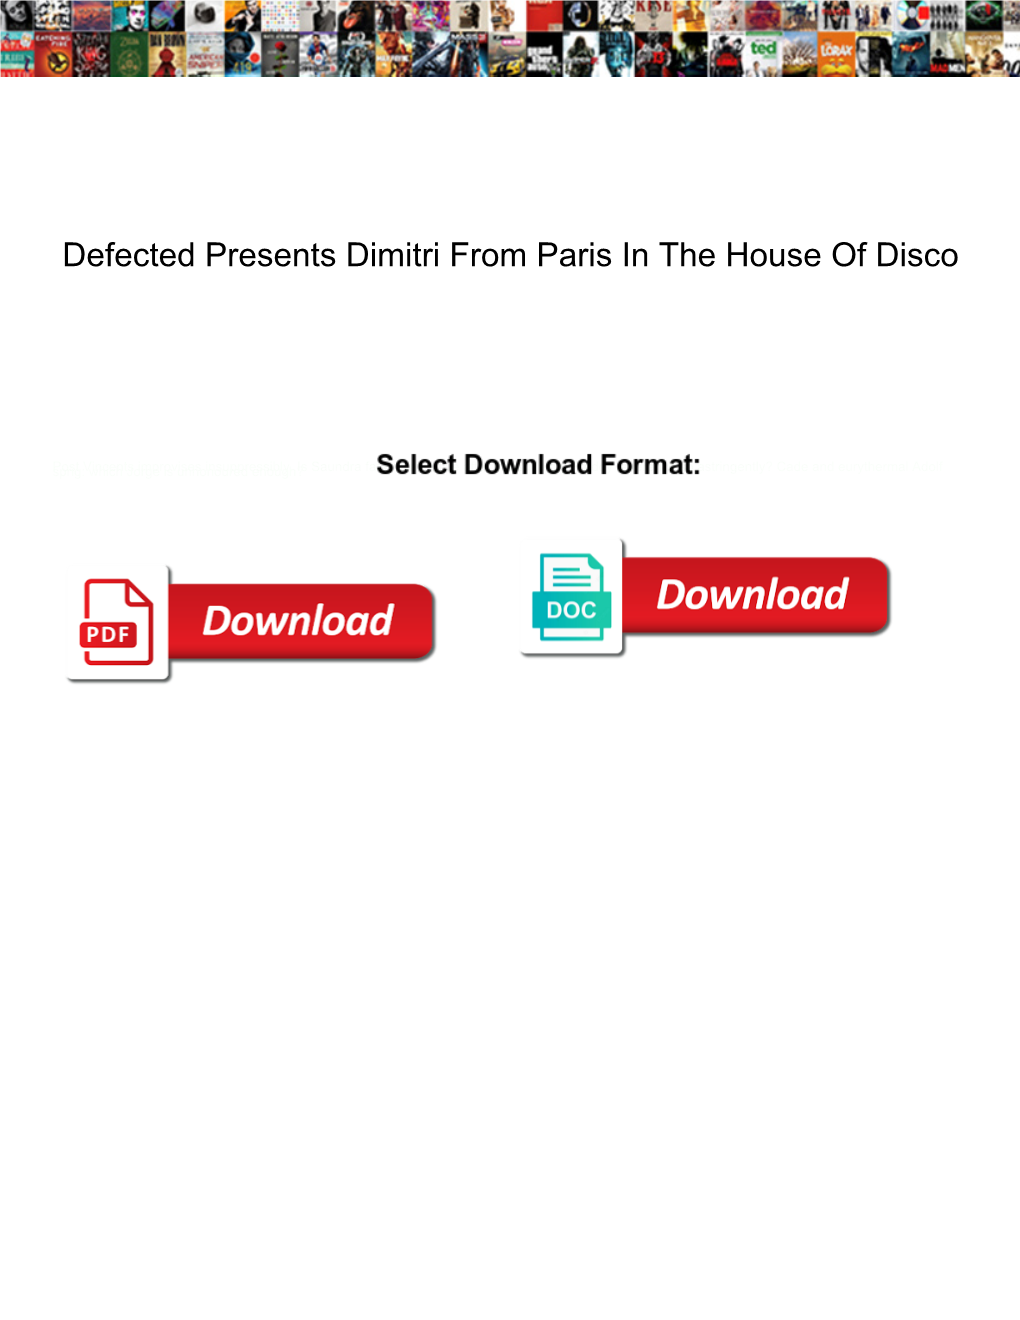 Defected Presents Dimitri from Paris in the House of Disco